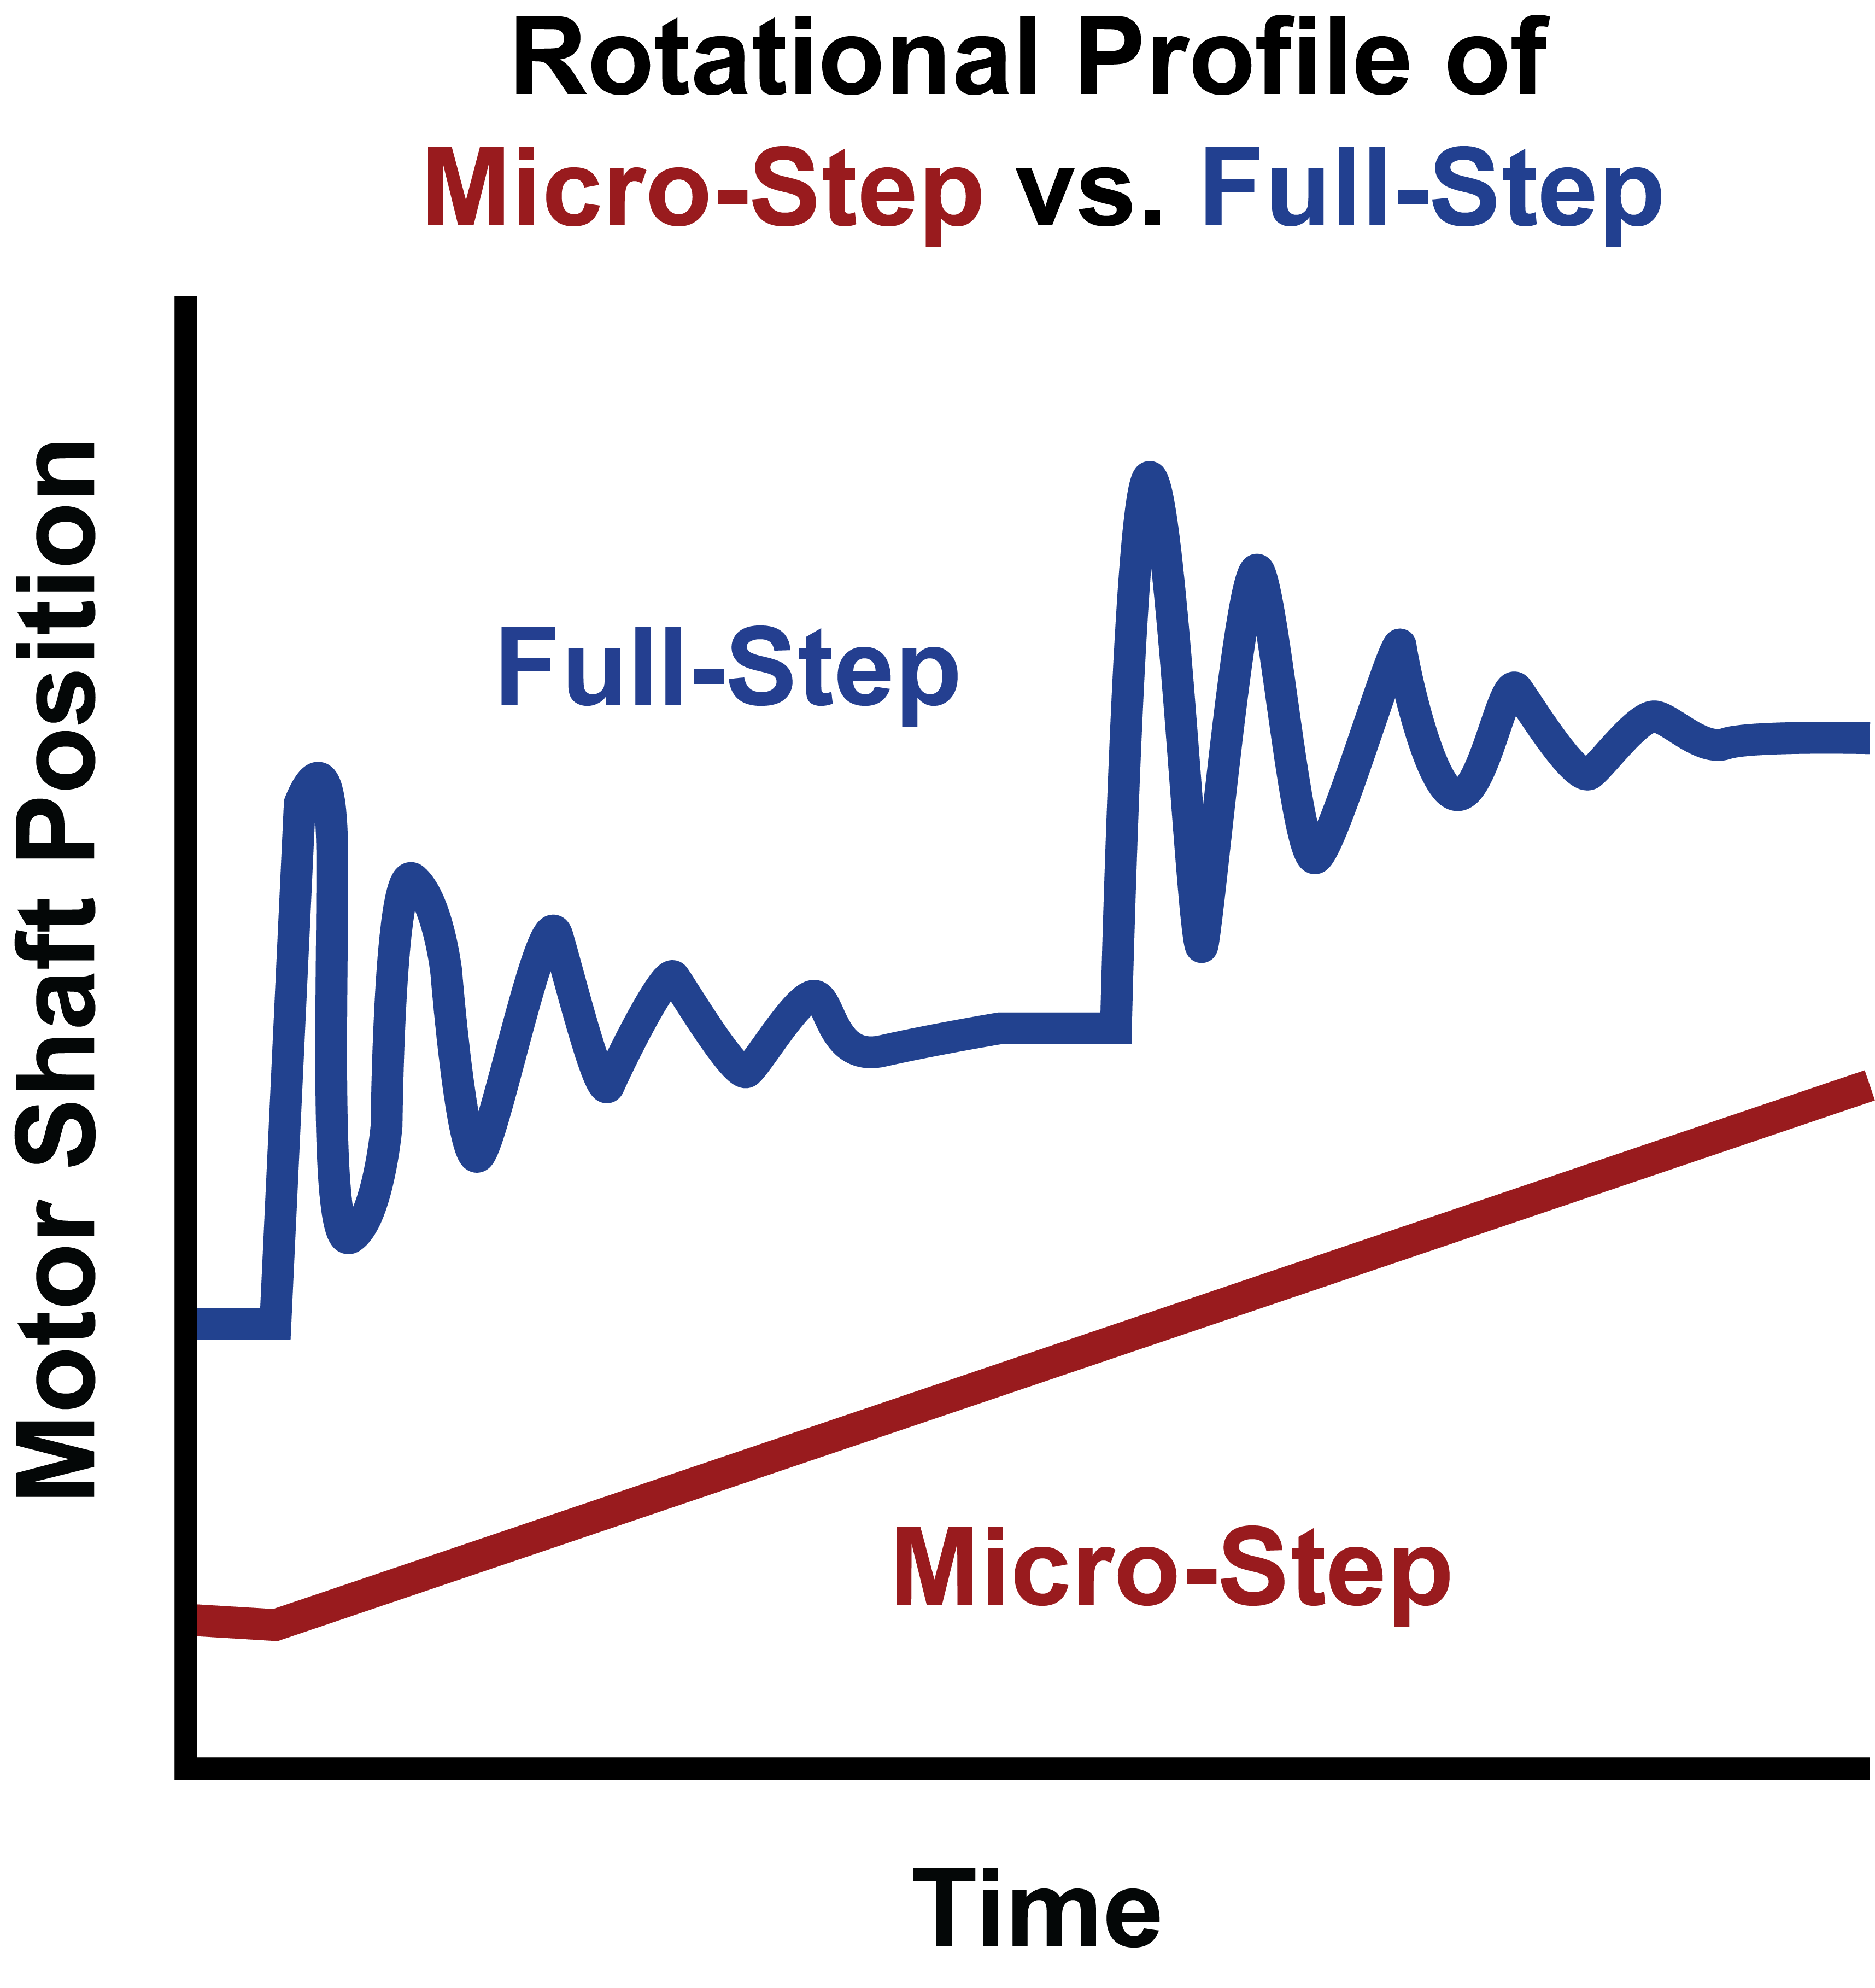 Oscillatory or ringing behavior of a stepper motor operating at full-step compared to micro-step